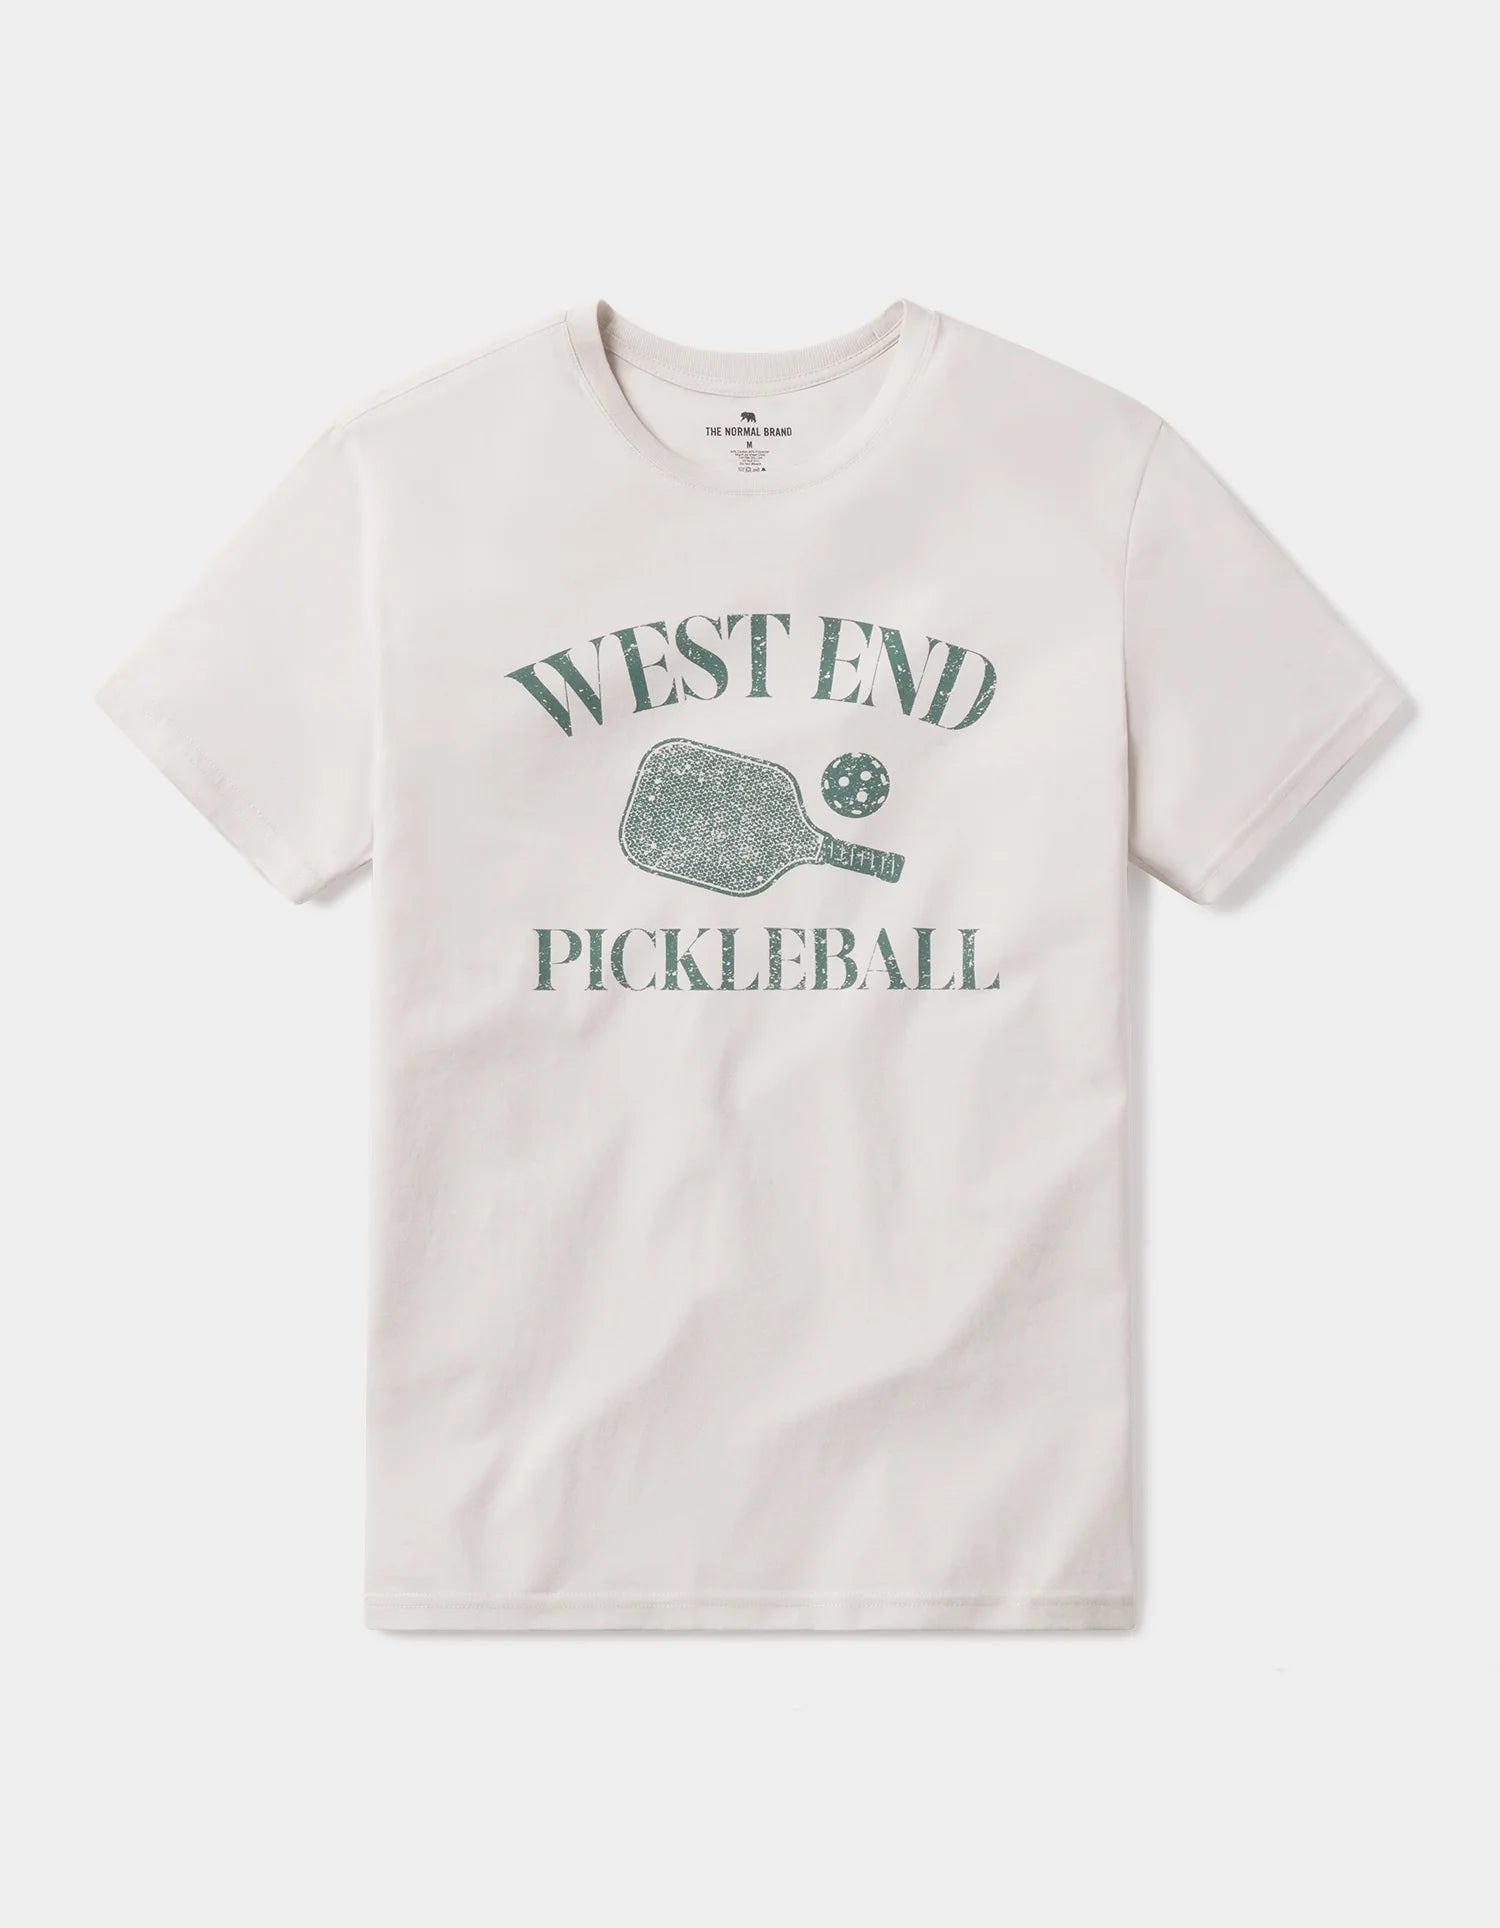 The Normal Brand West End Pickleball Tee